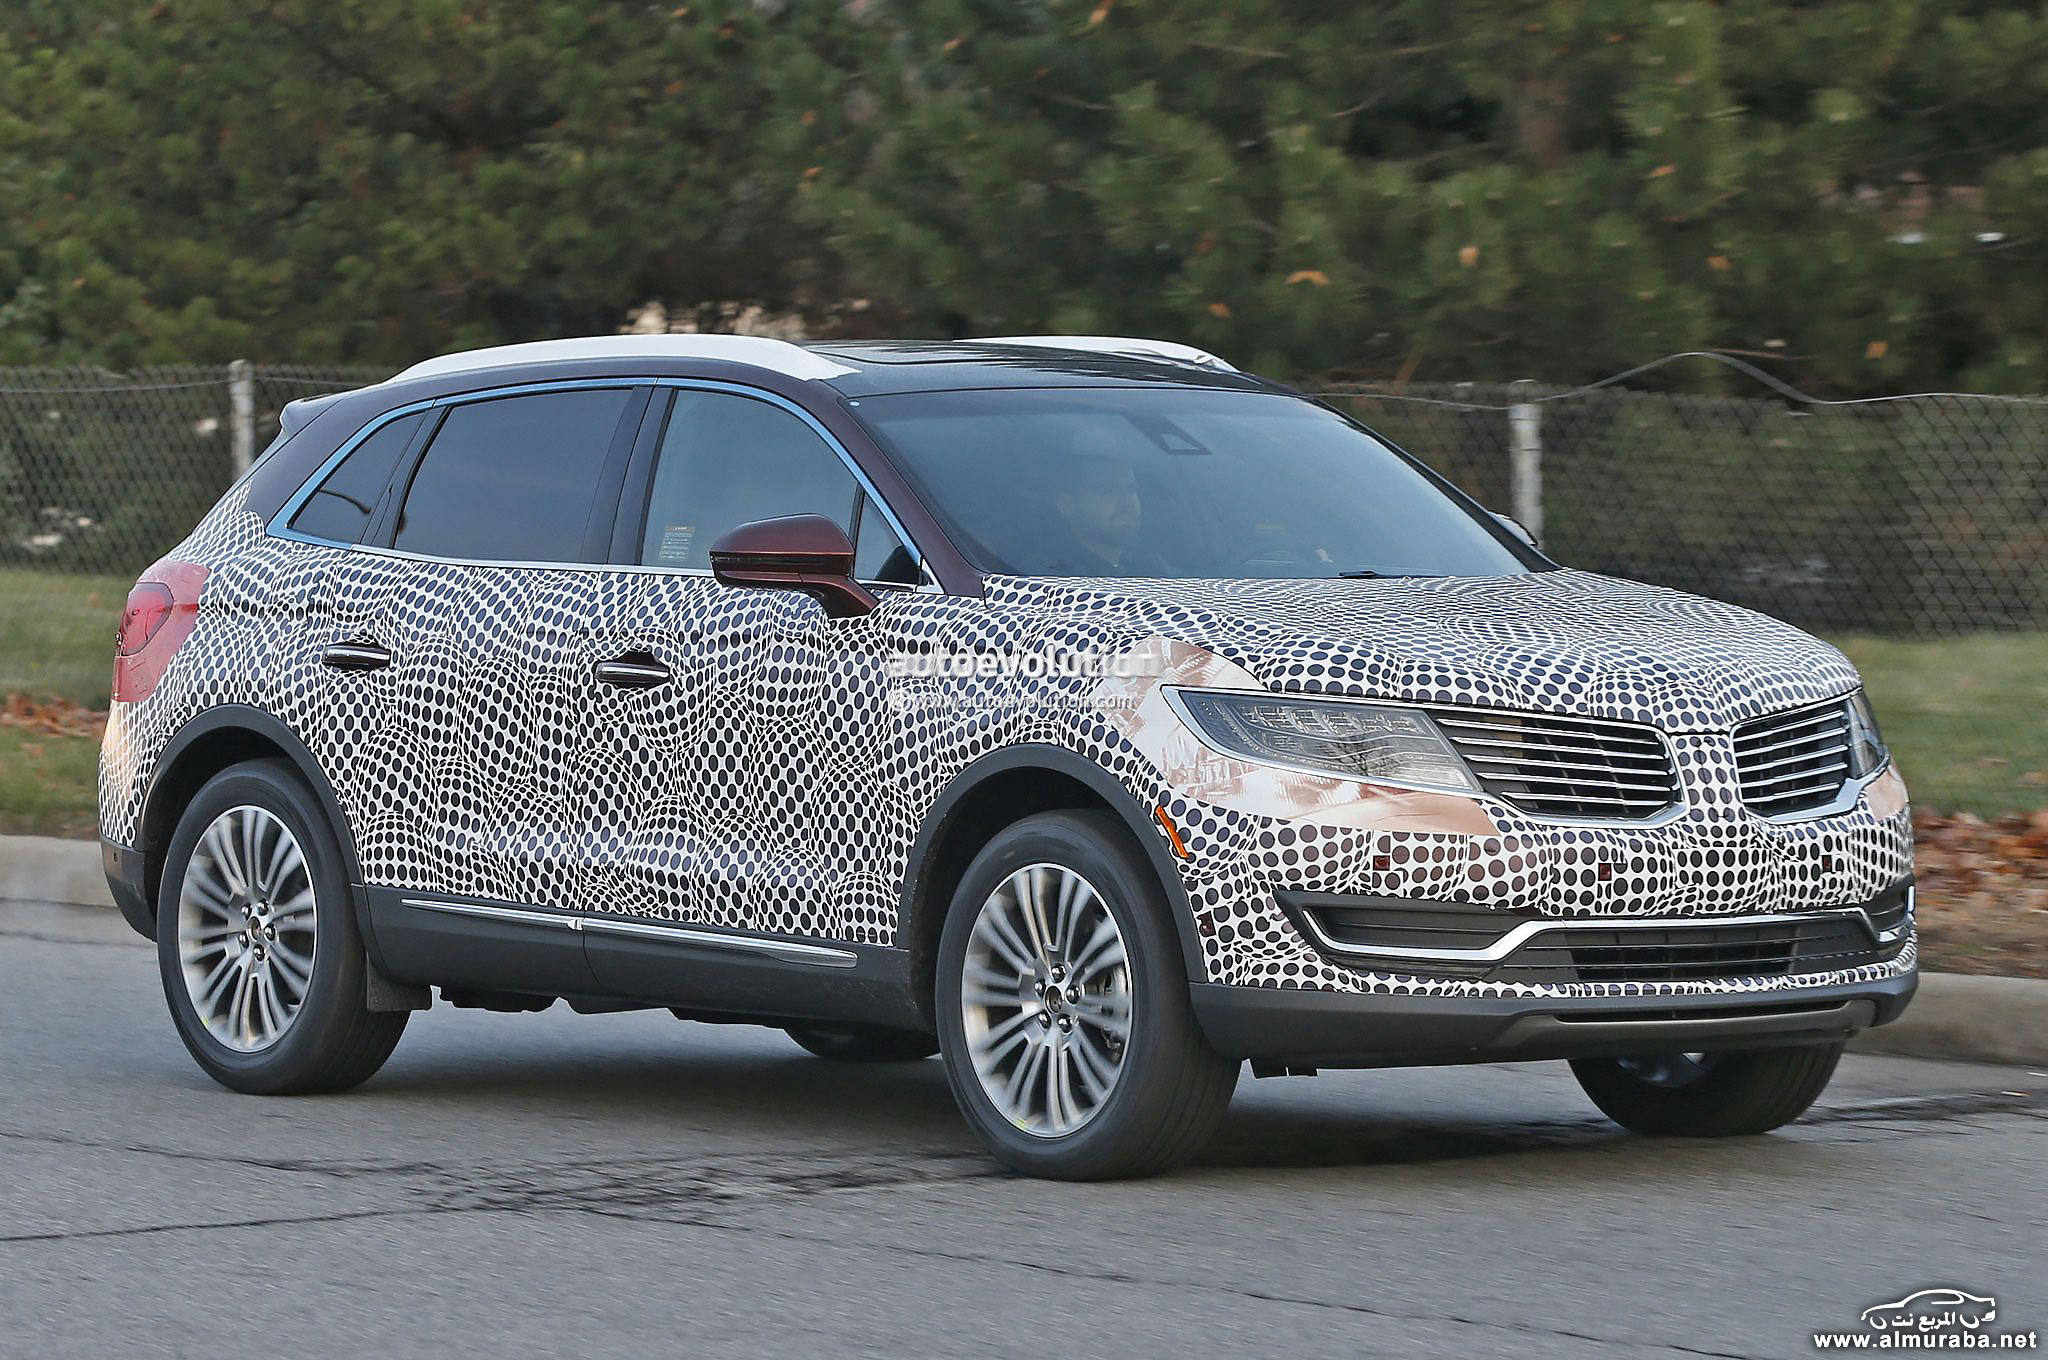 2016-lincoln-mkx-spied-in-production-ready-guise-photo-gallery_4